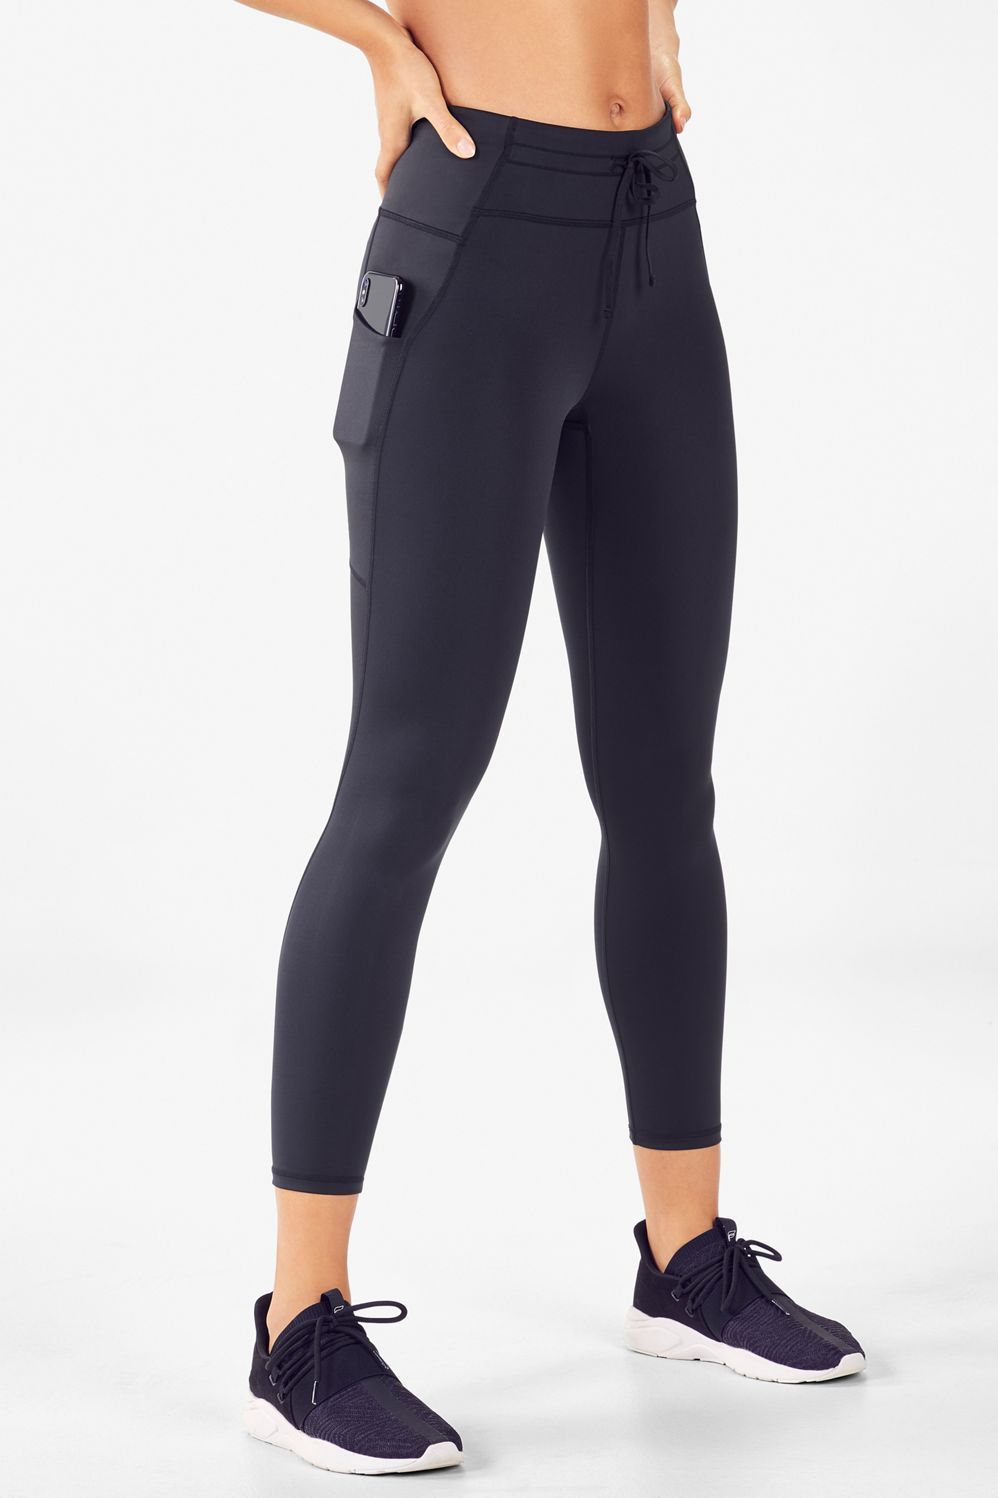 which lululemon leggings have pockets